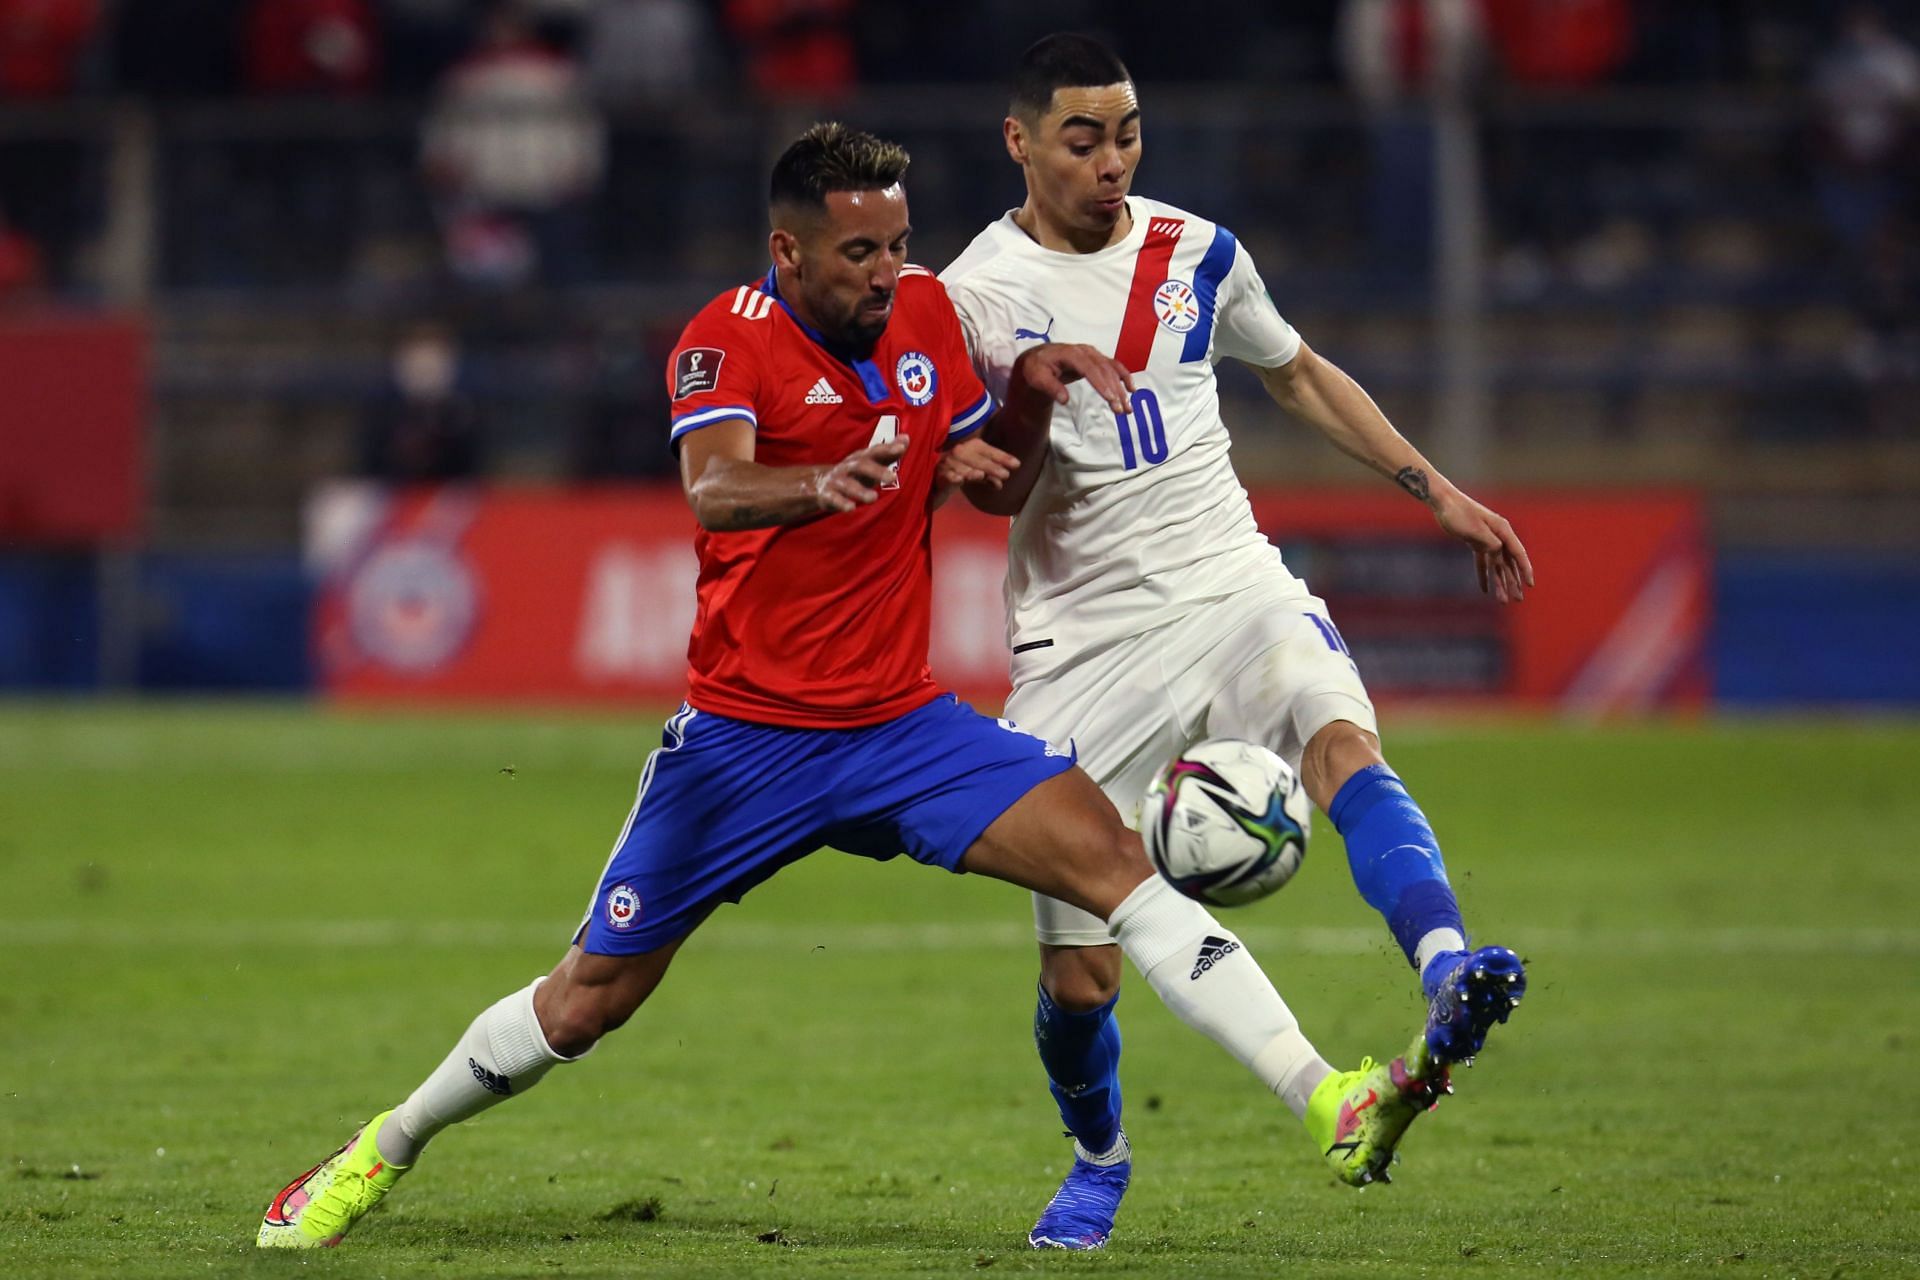 Chile v Paraguay - FIFA World Cup 2022 Qatar Qualifier